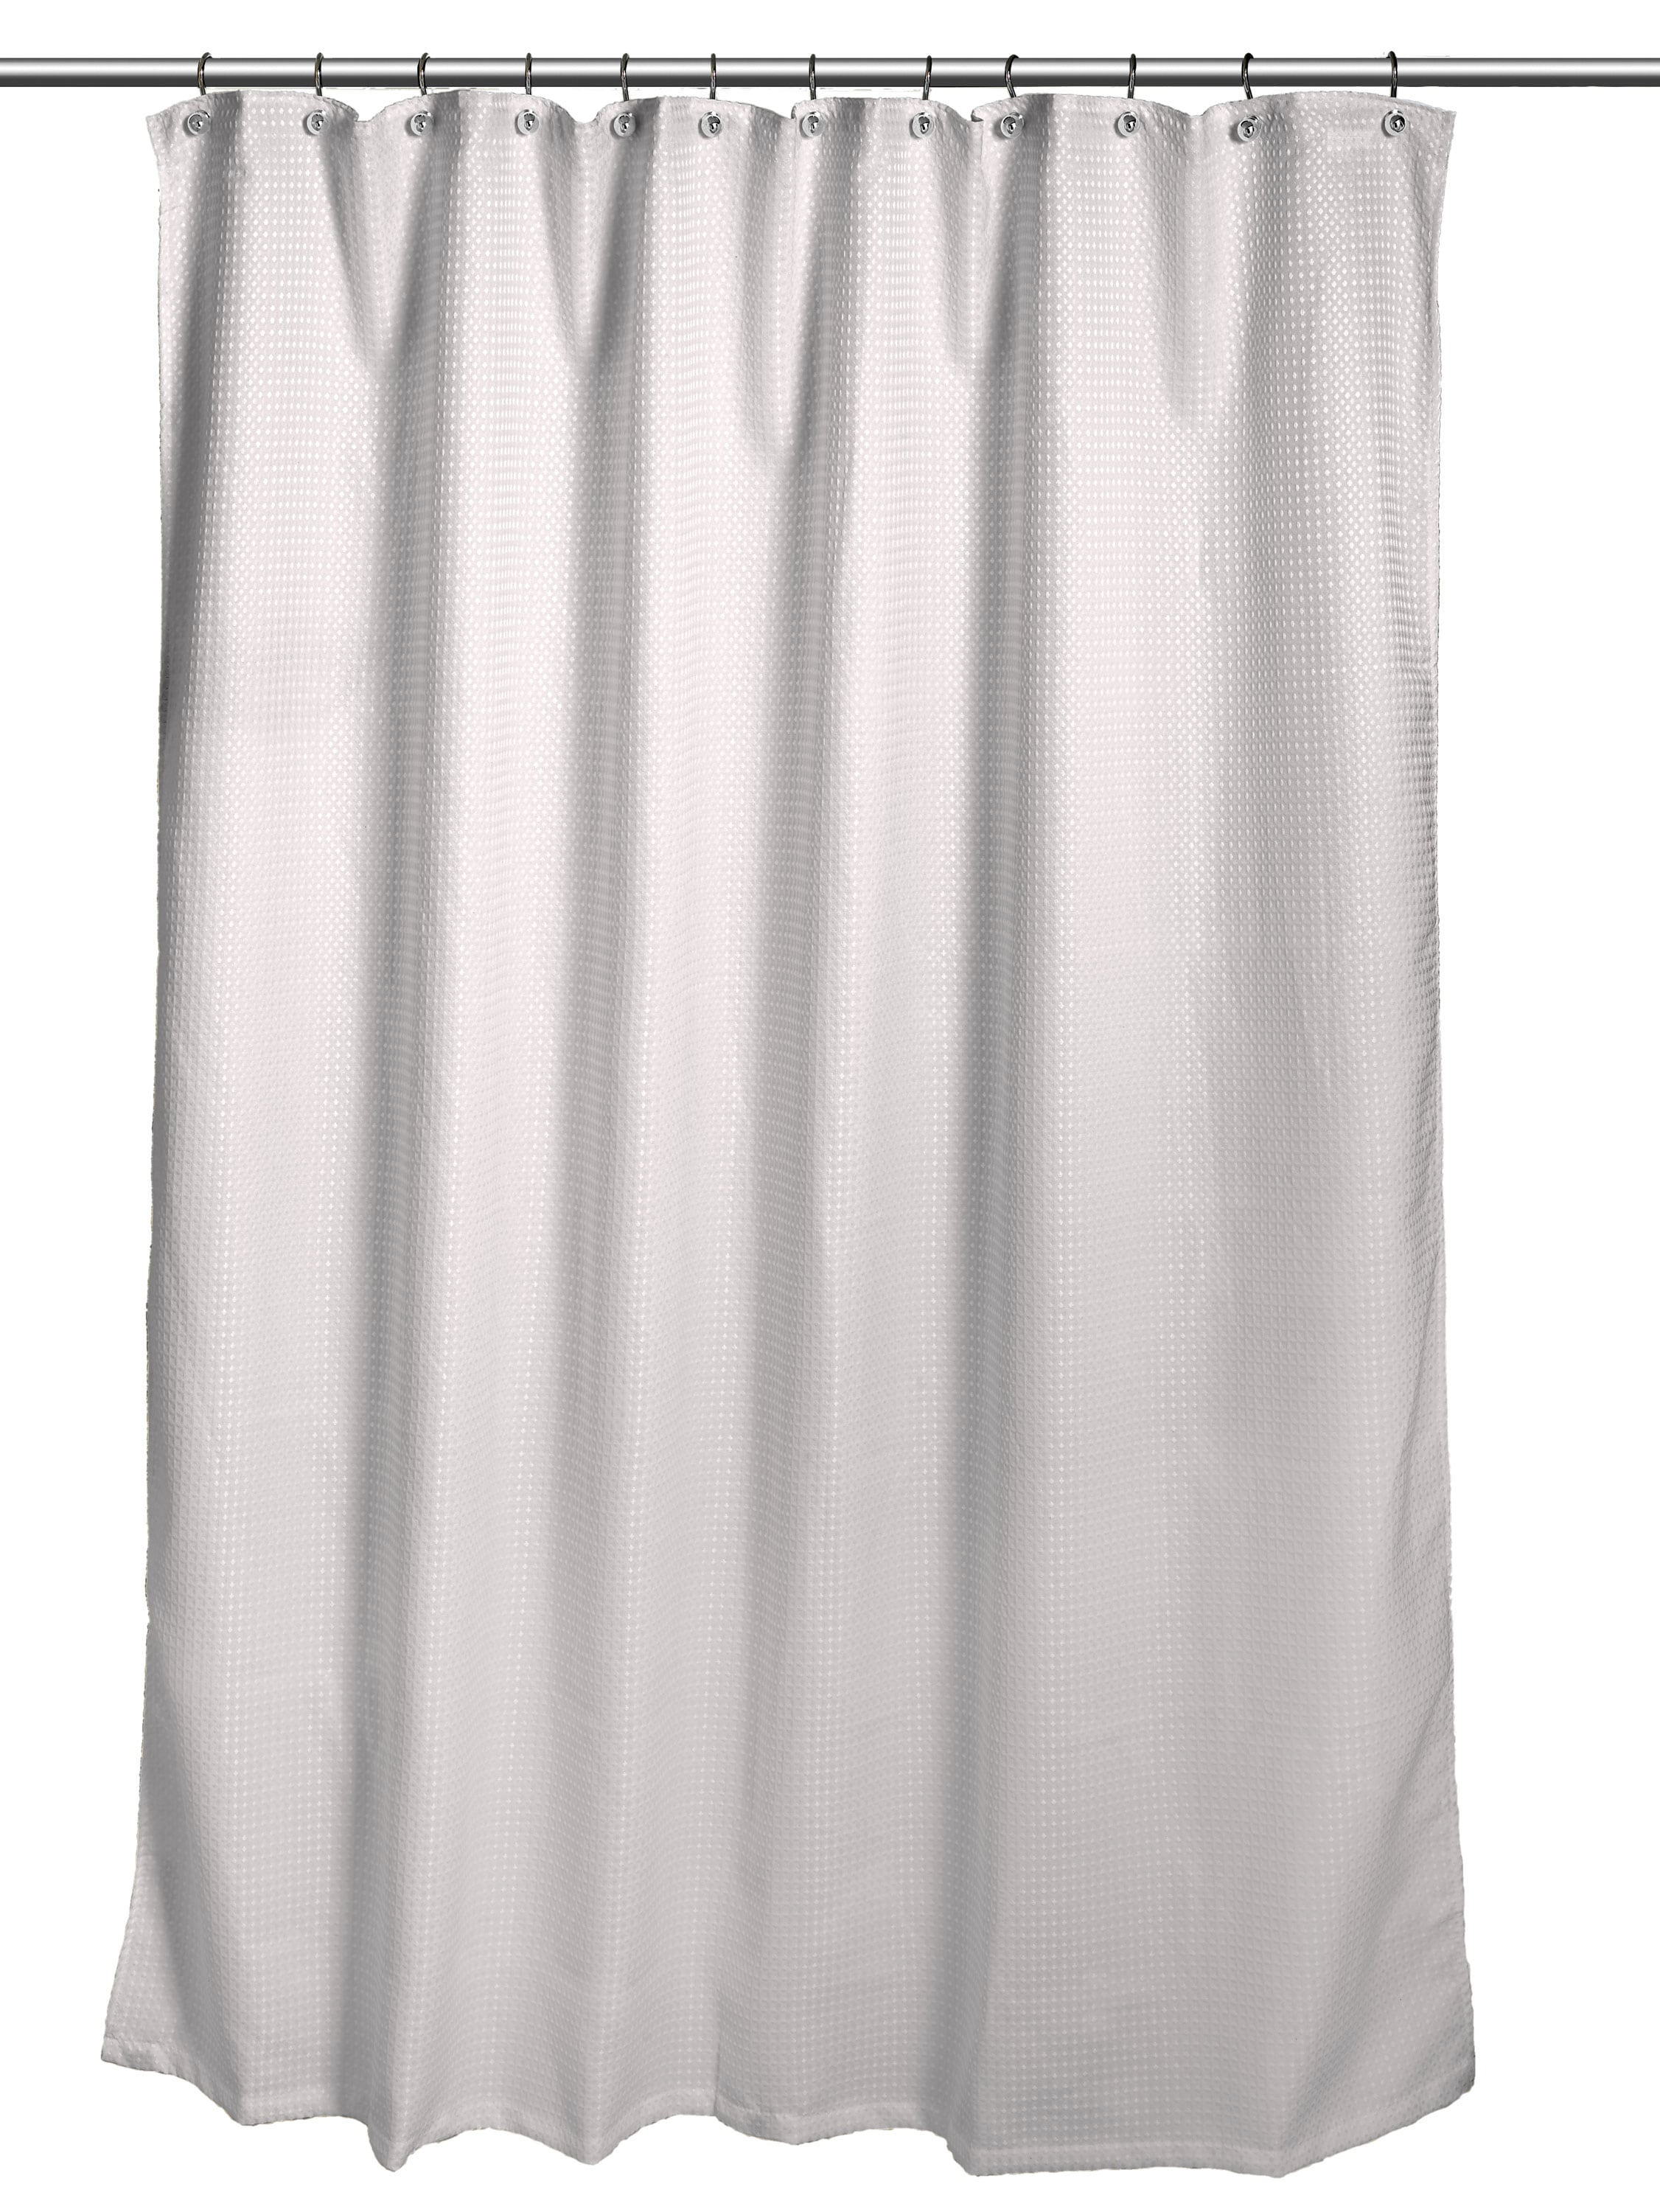 Polyester Shower Curtain Plain White Extra Wide Extra Long Standard W Hooks Ring 